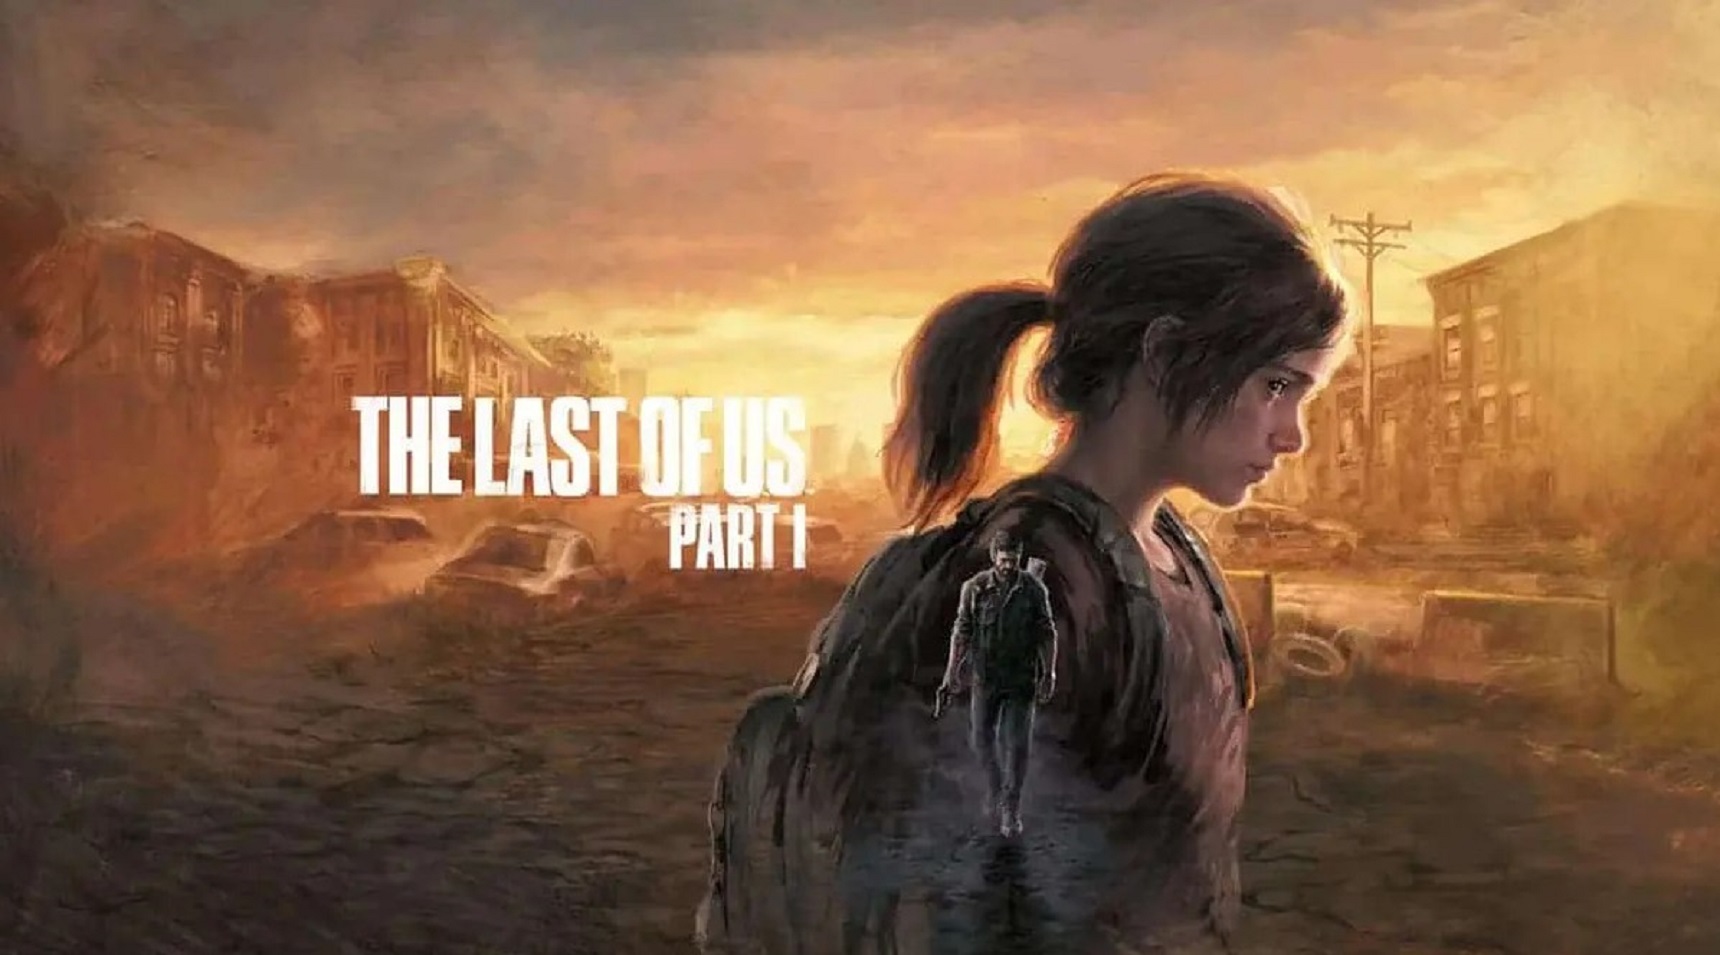 Download The Last Of Us Part I Digital Deluxe Edition